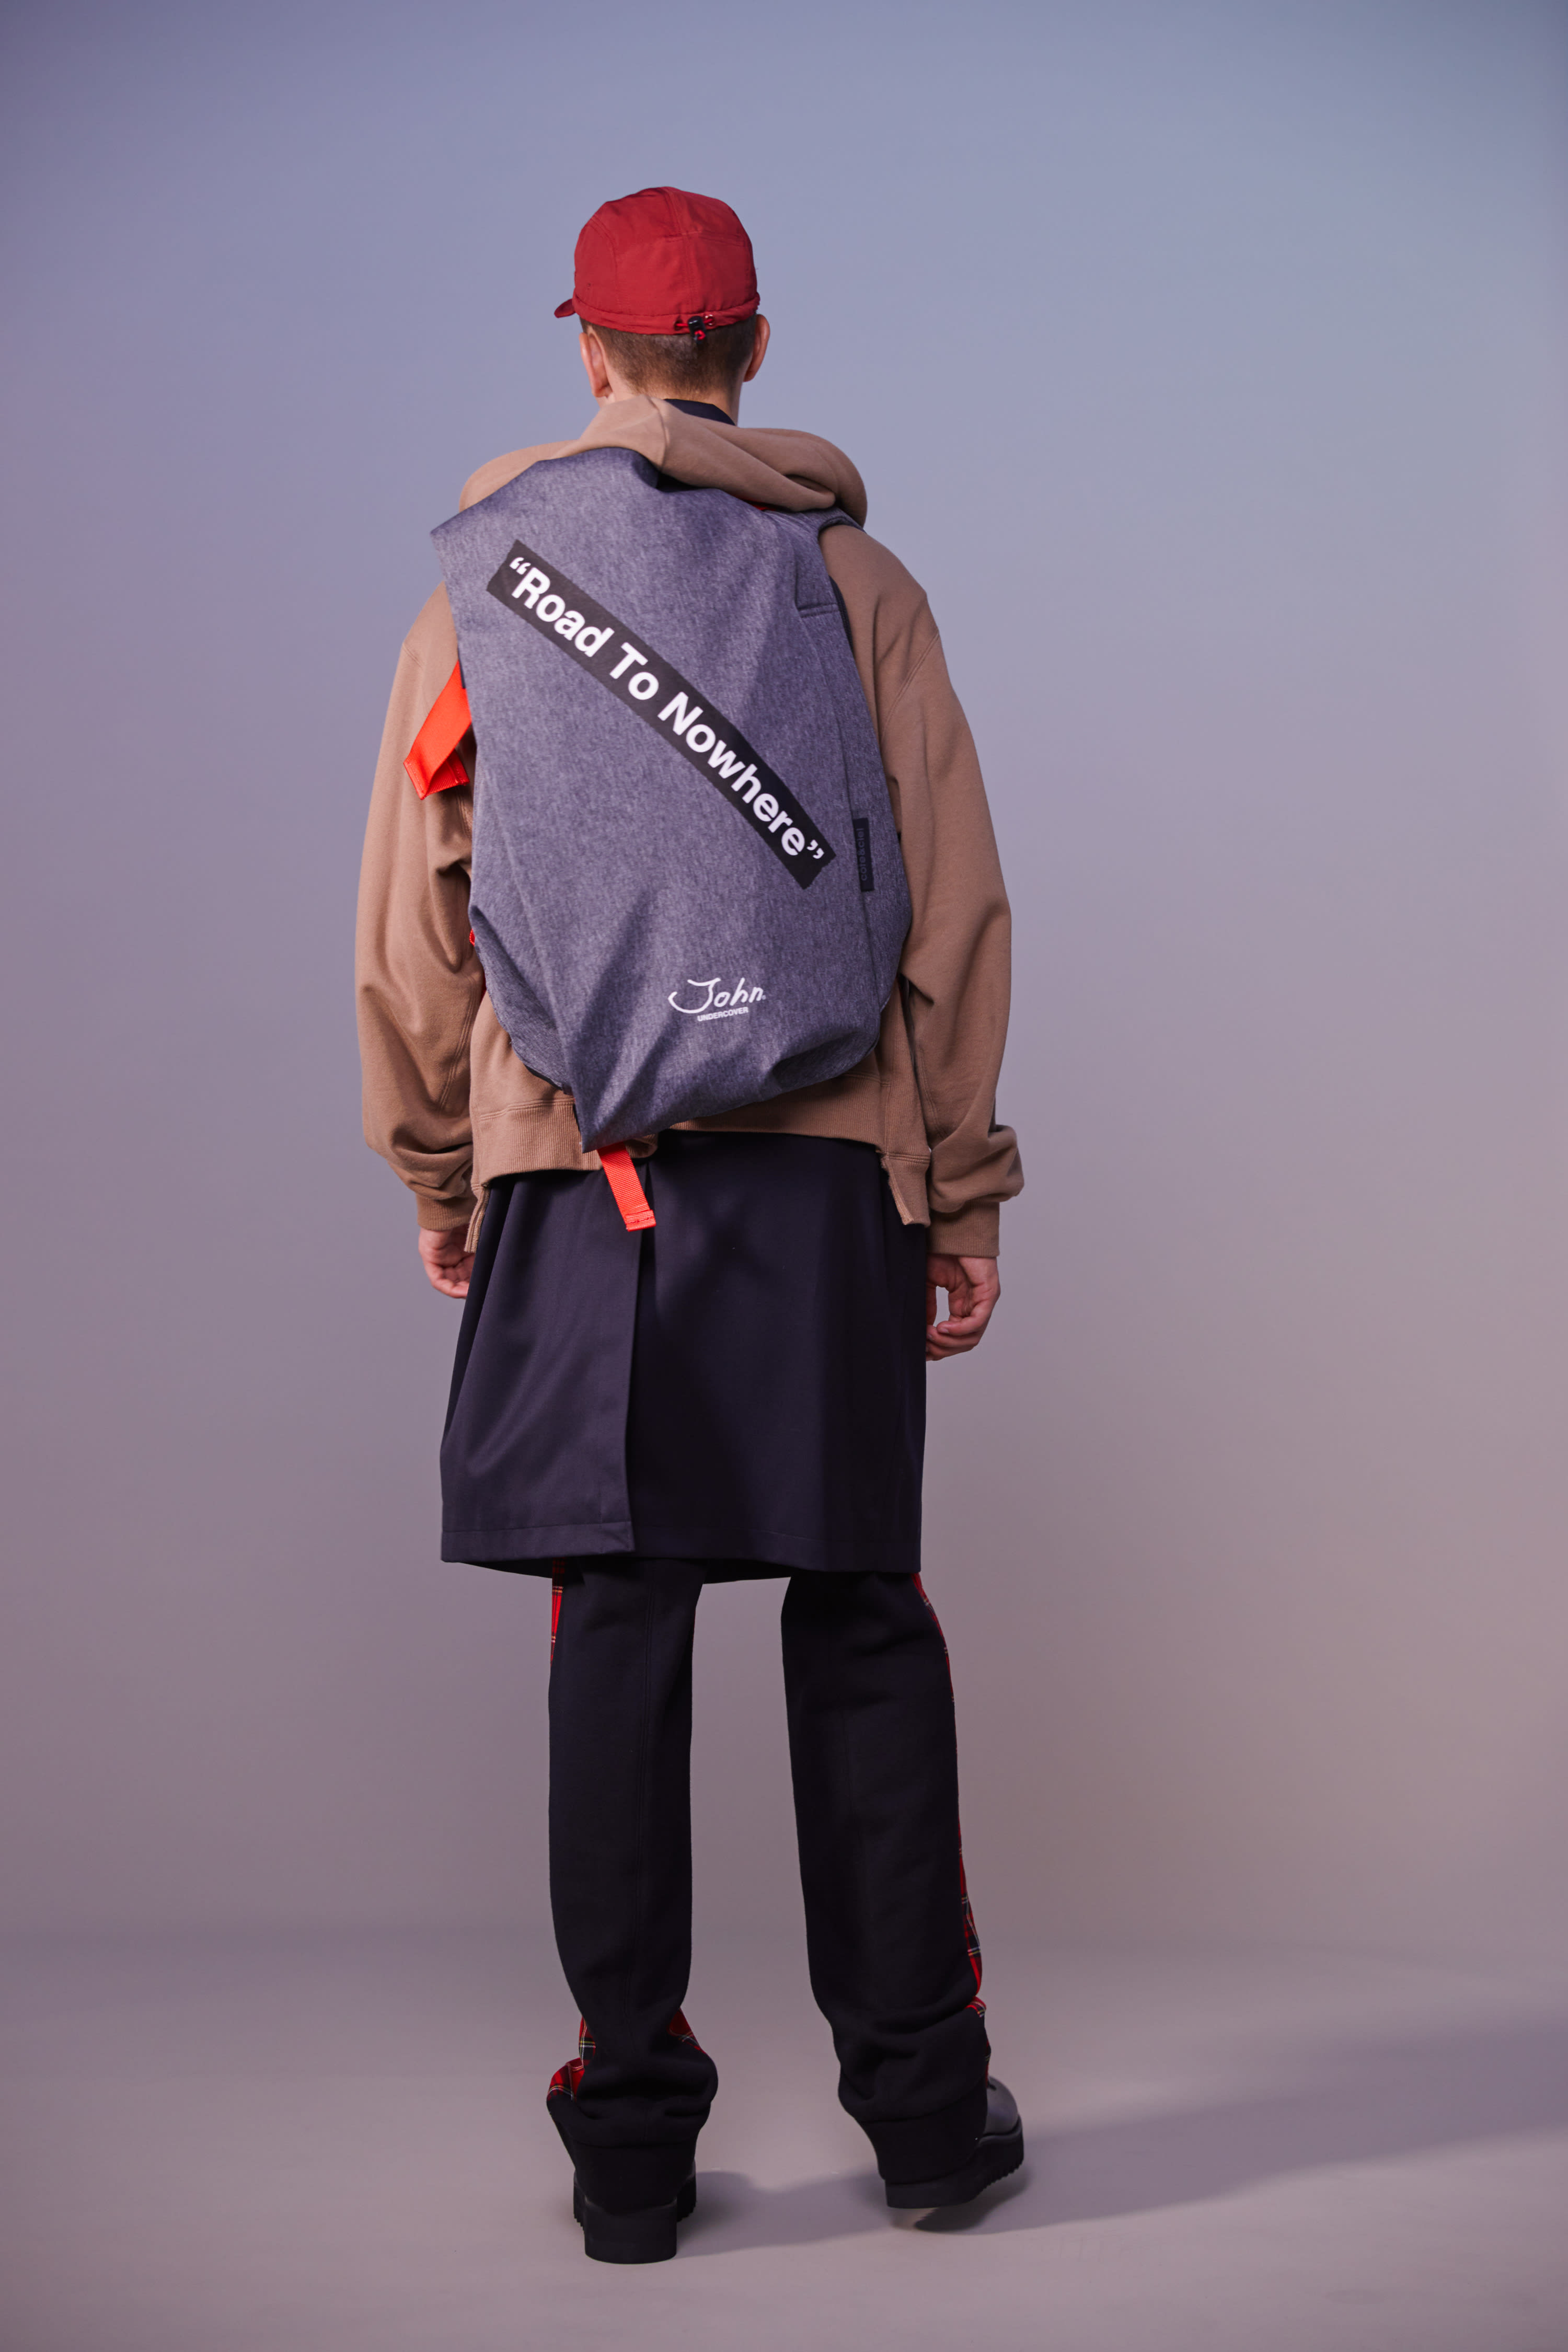 côte&ciel + JohnUNDERCOVER Link up for an Exclusive Isar 